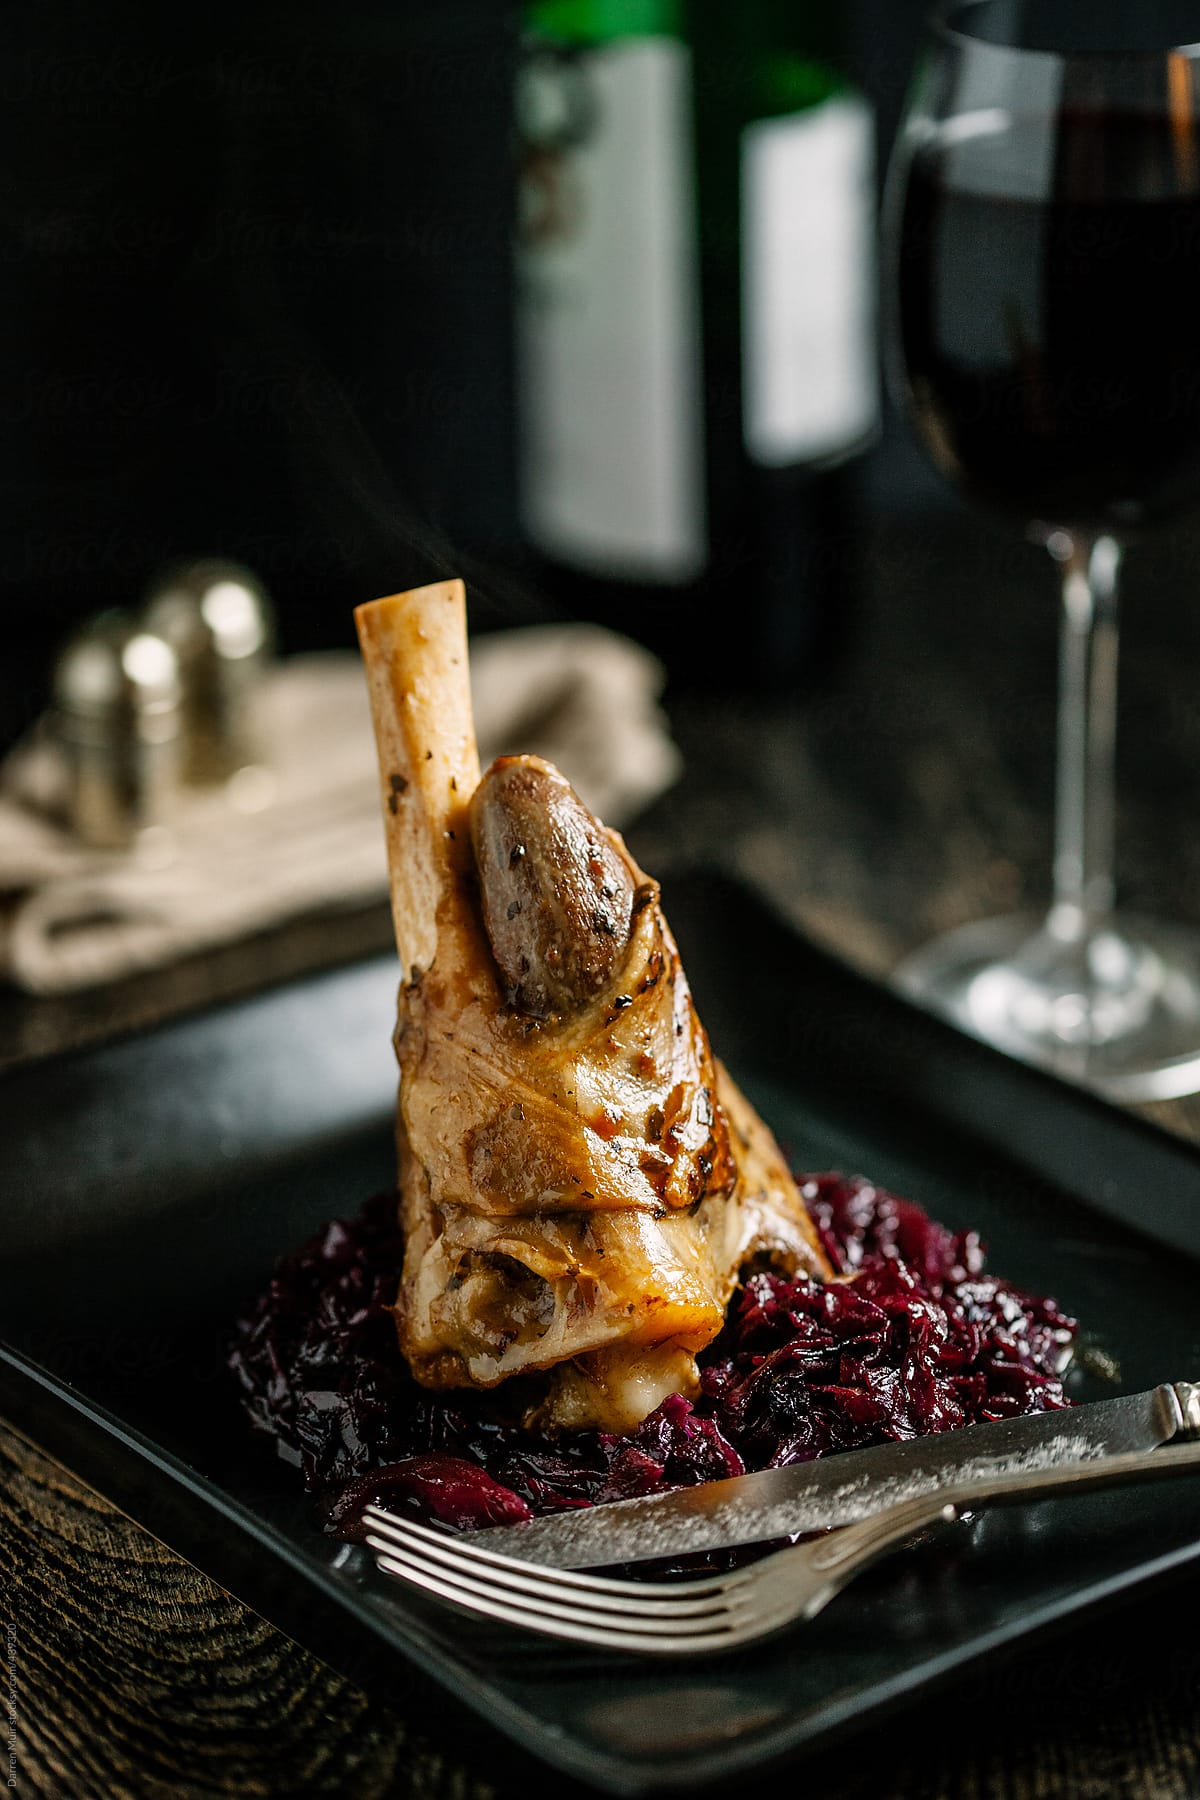 Lamb shank and red cabbage.